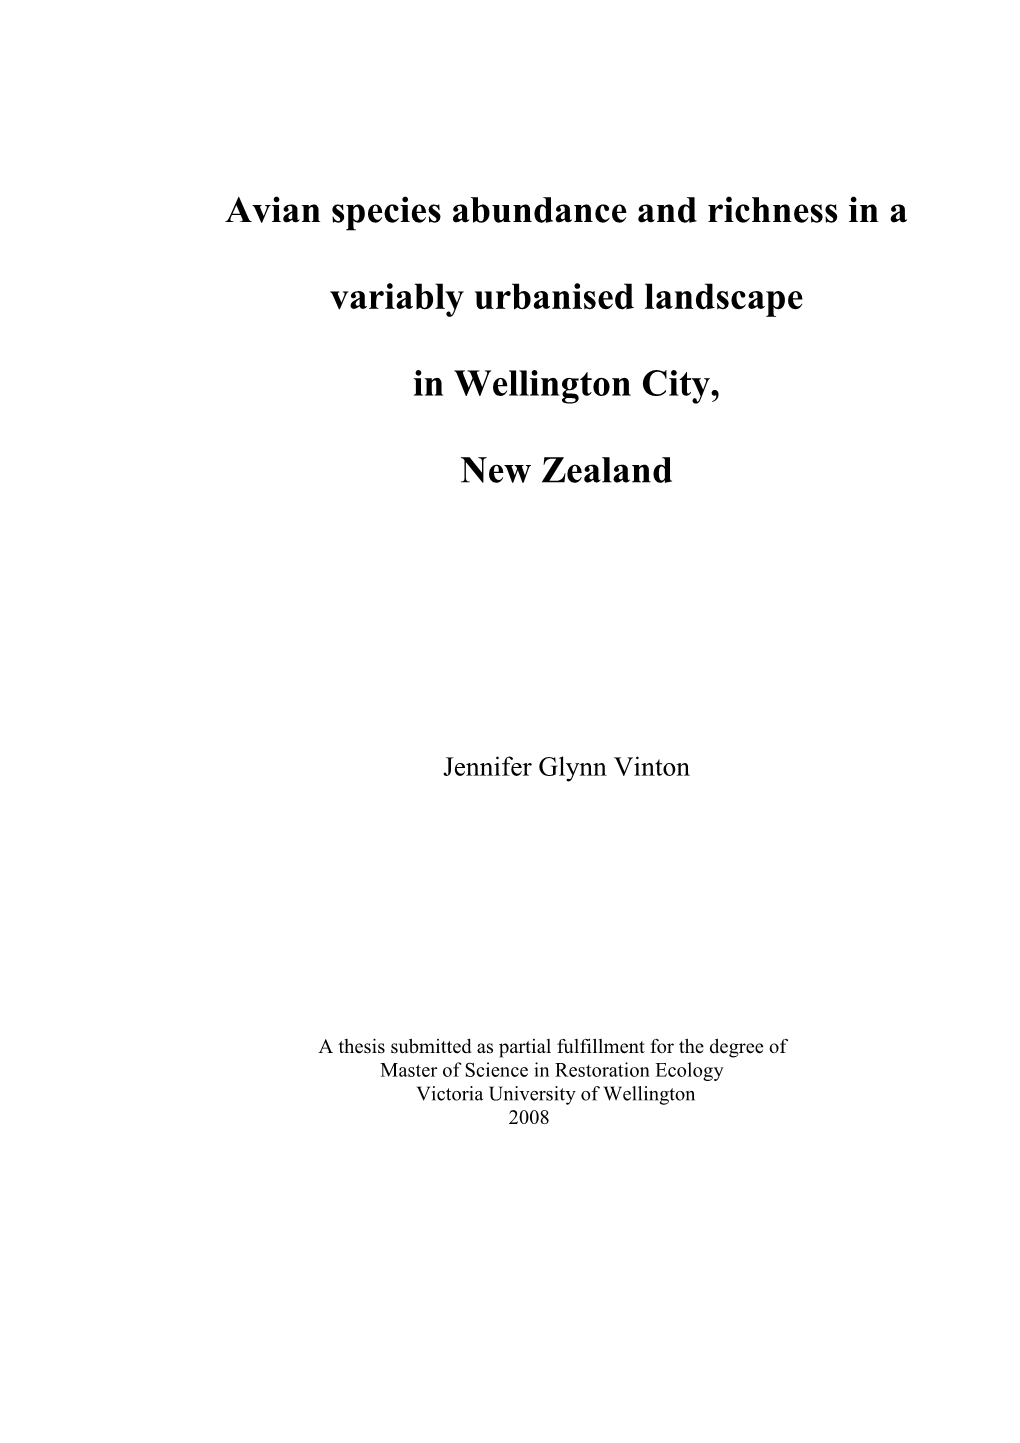 Avian Species Abundance and Richness in a Variably Urbanised